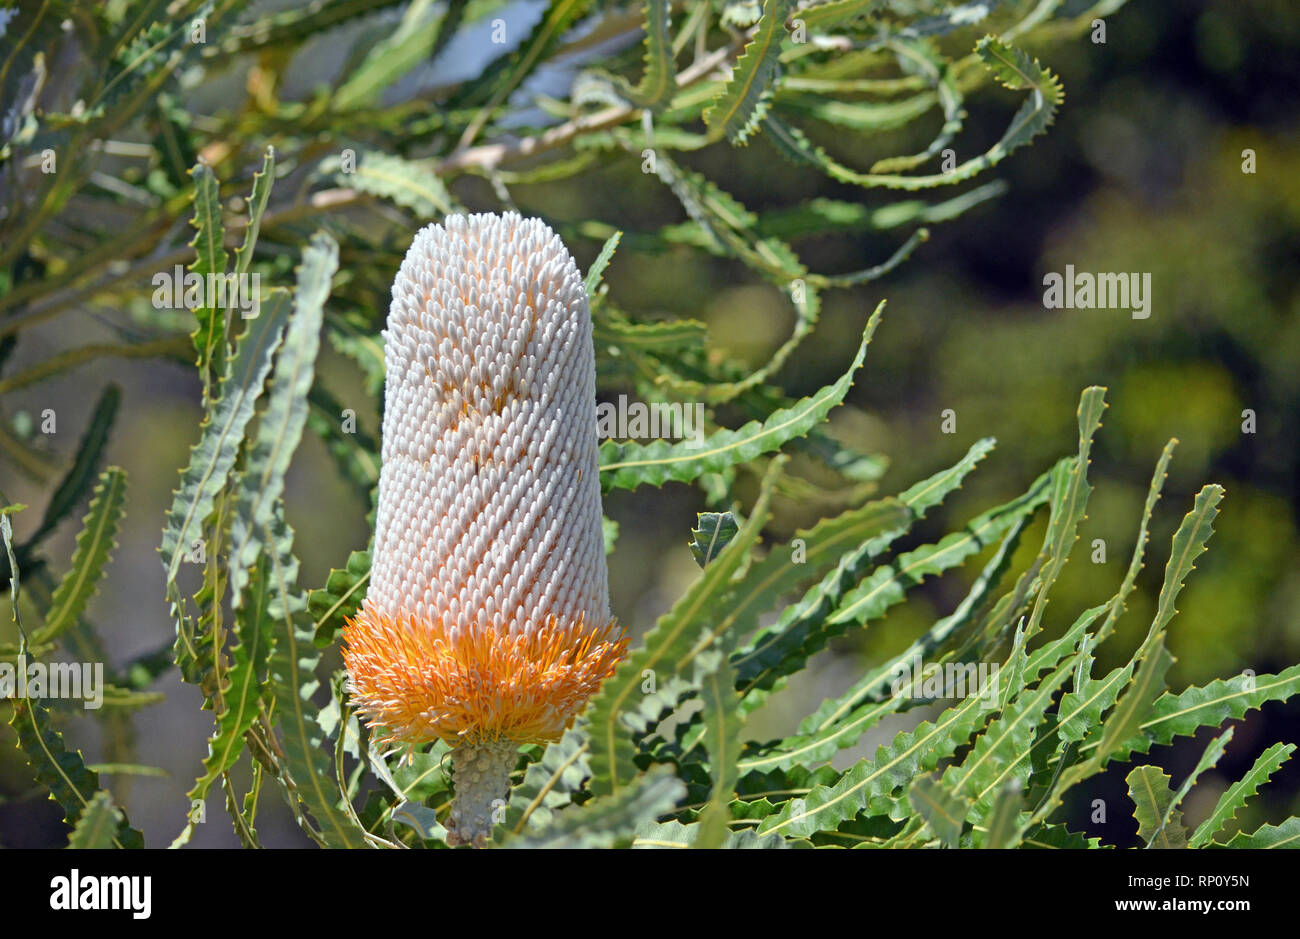 Unusual white and orange inflorescence of the Acorn Banksia, Banksia prionotes, family Proteaceae. Native to west coast of Western Australia. Stock Photo